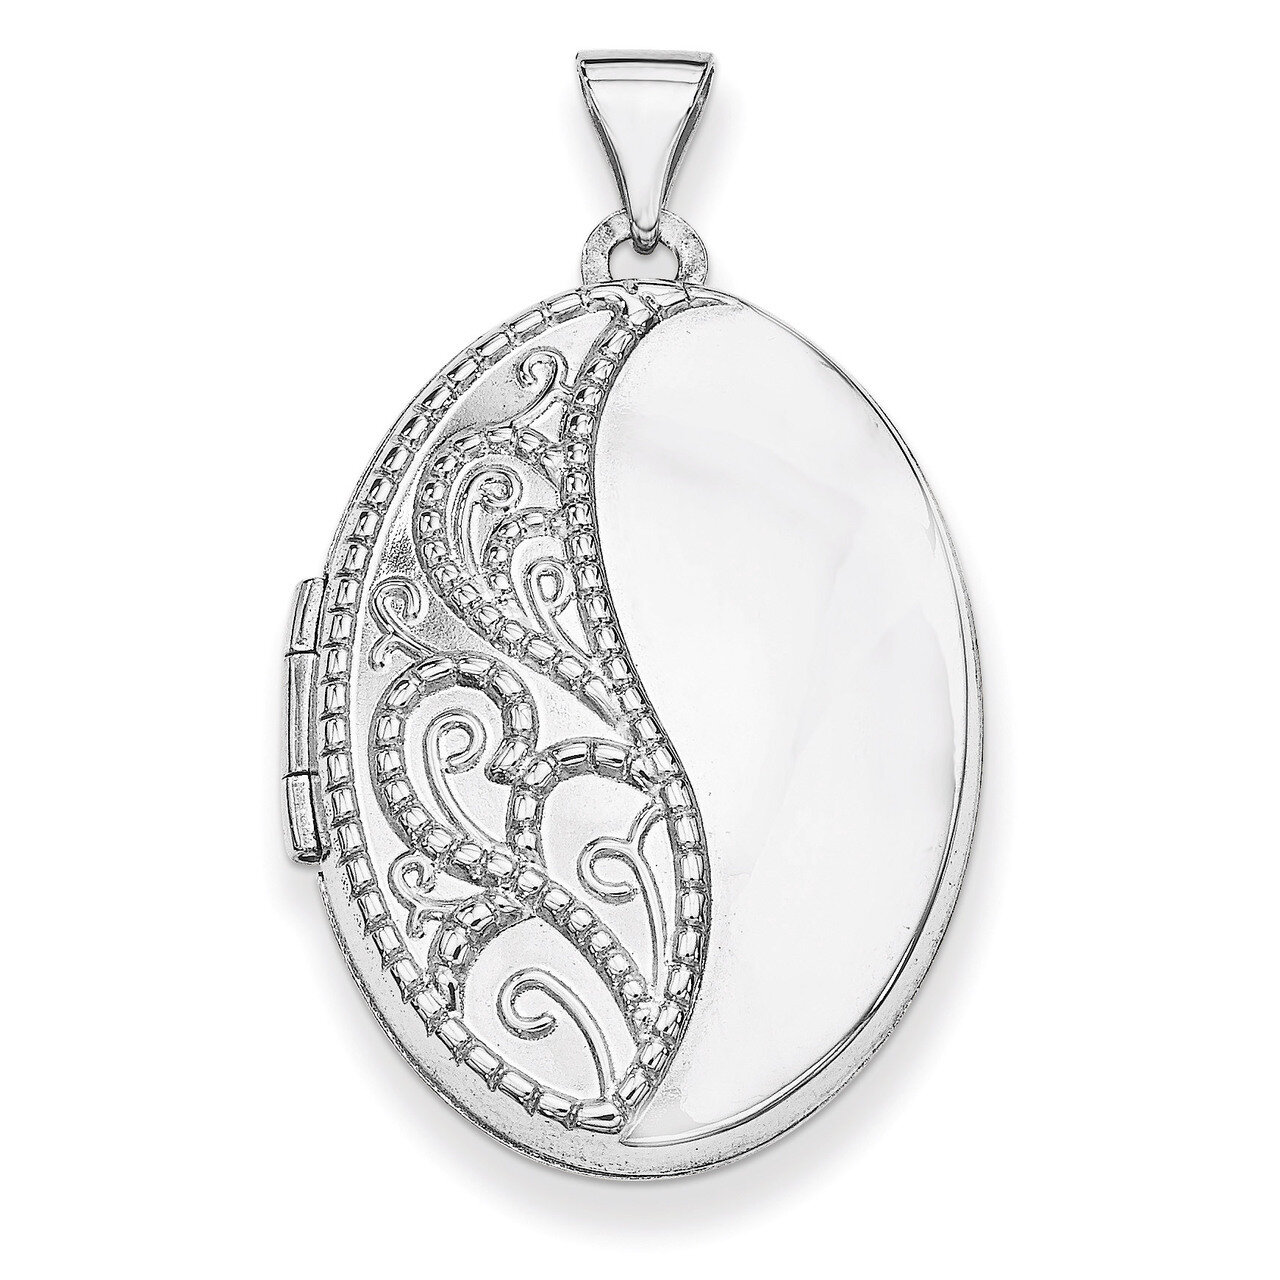 26mm Oval 1/2 Hand Engraved Locket 14k White Gold XL624